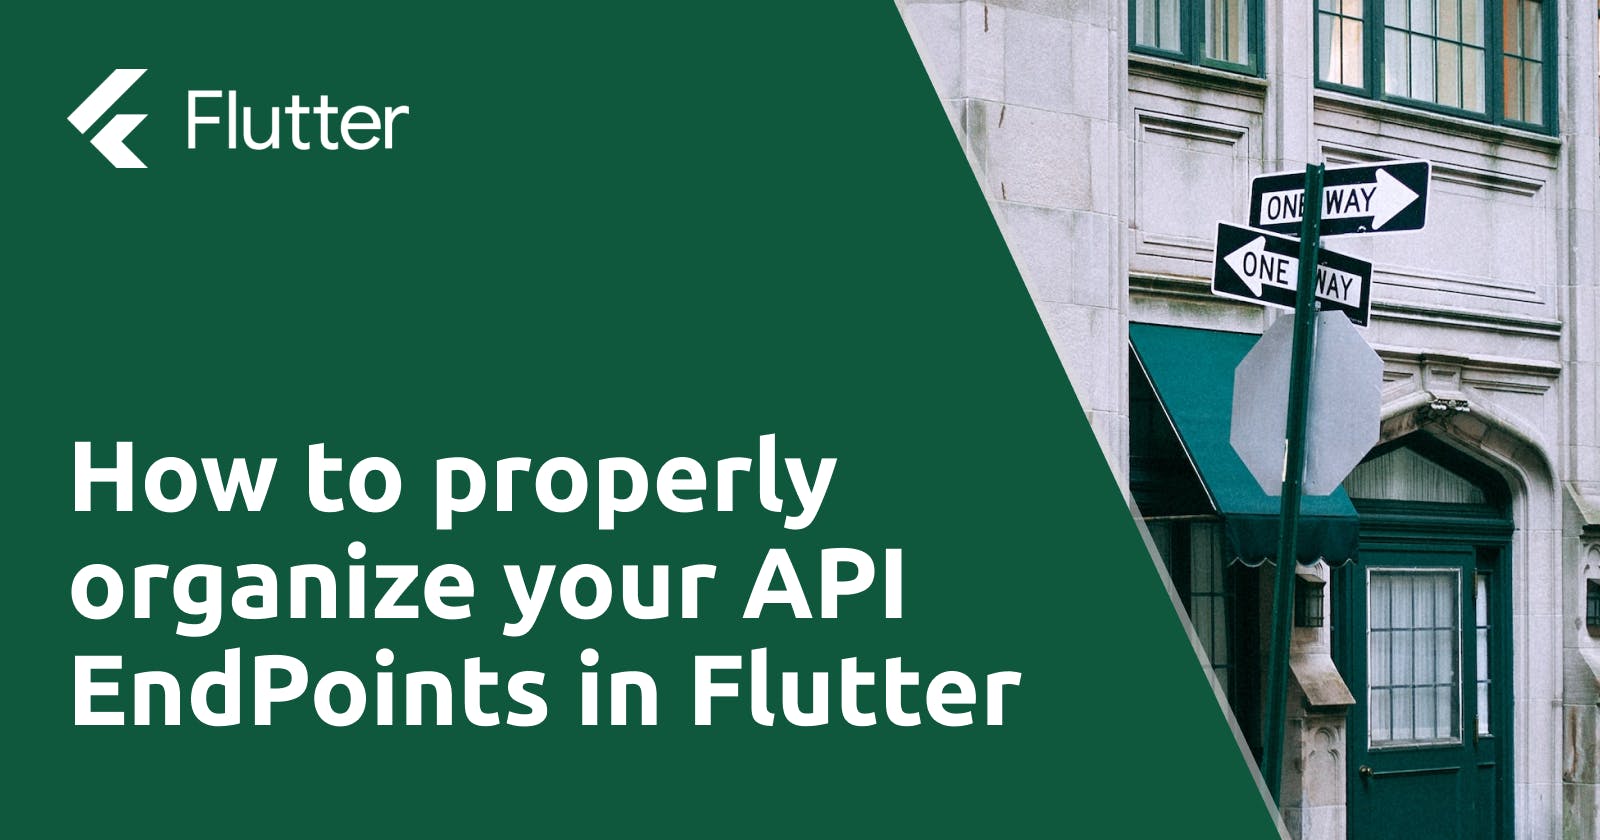 How to properly organize your API EndPoints in Flutter